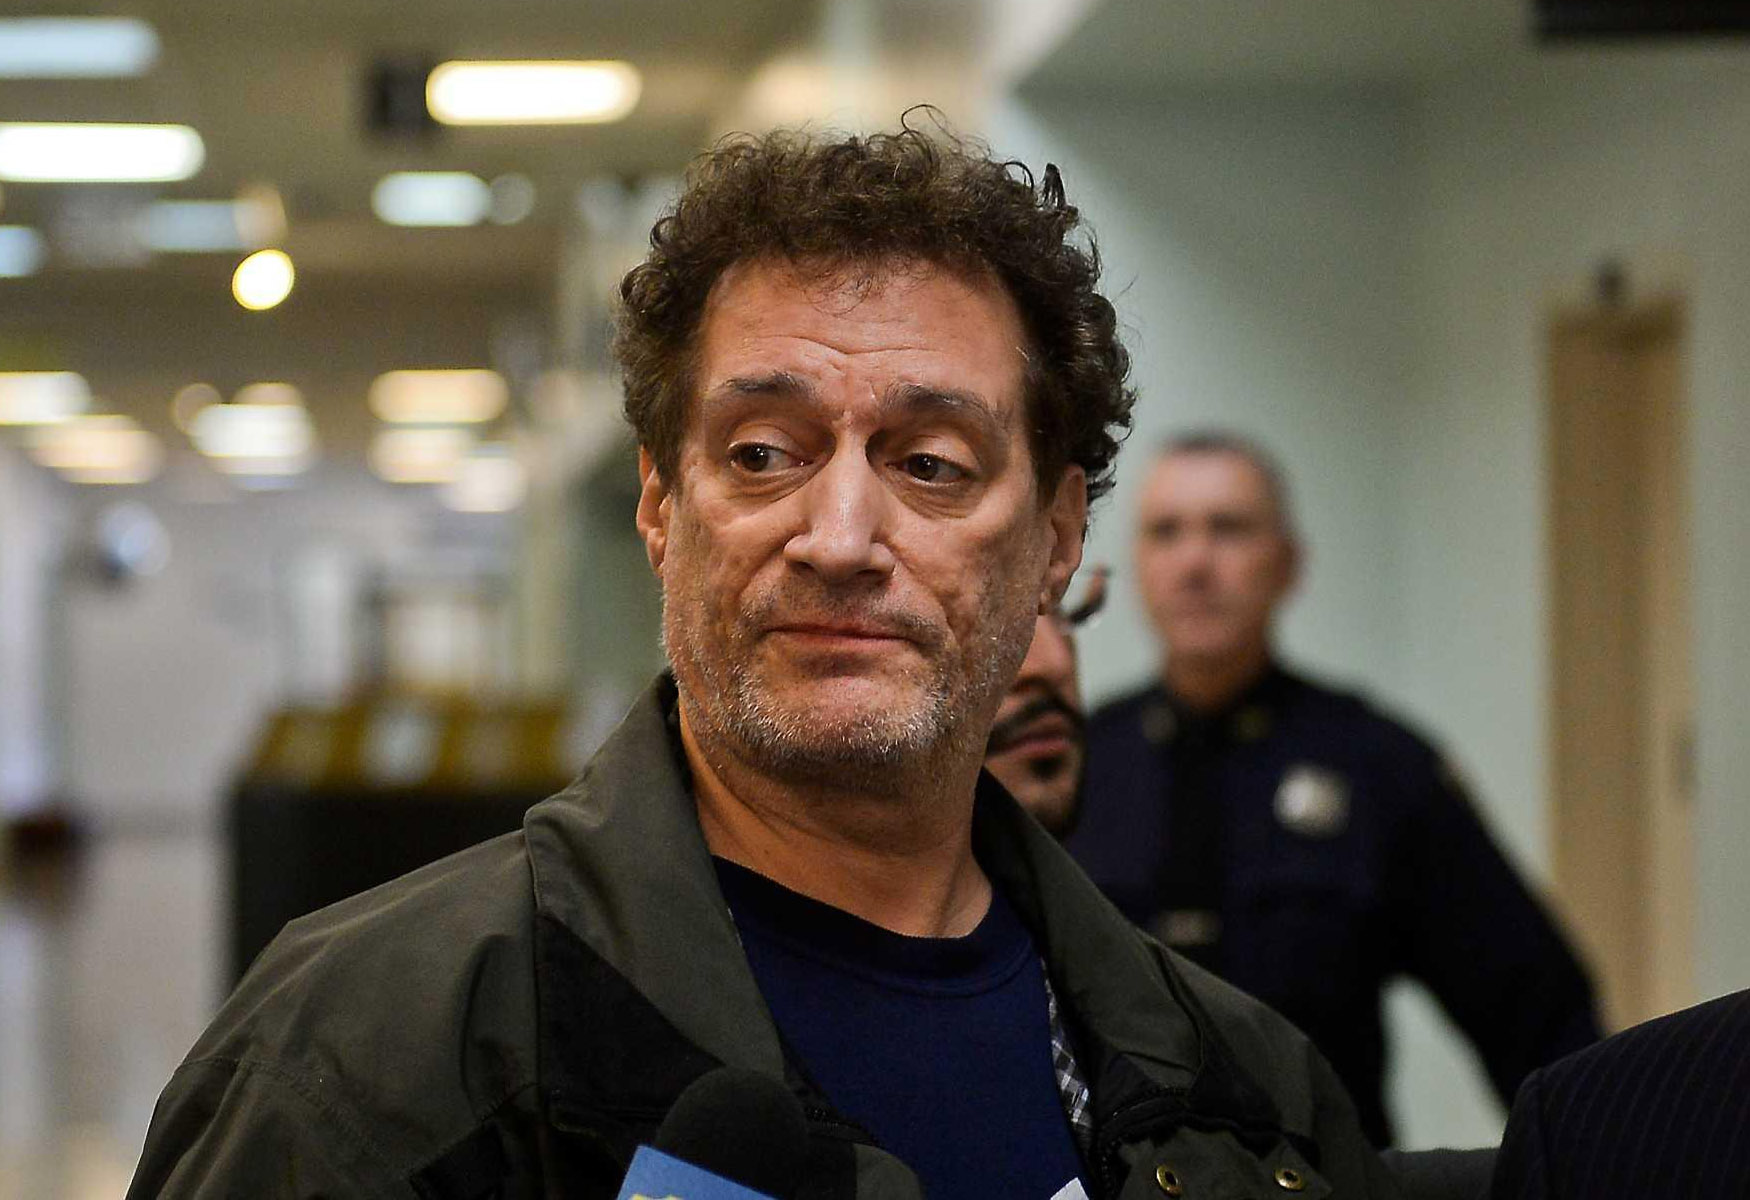 21 Astounding Facts About Anthony Cumia - Facts.net